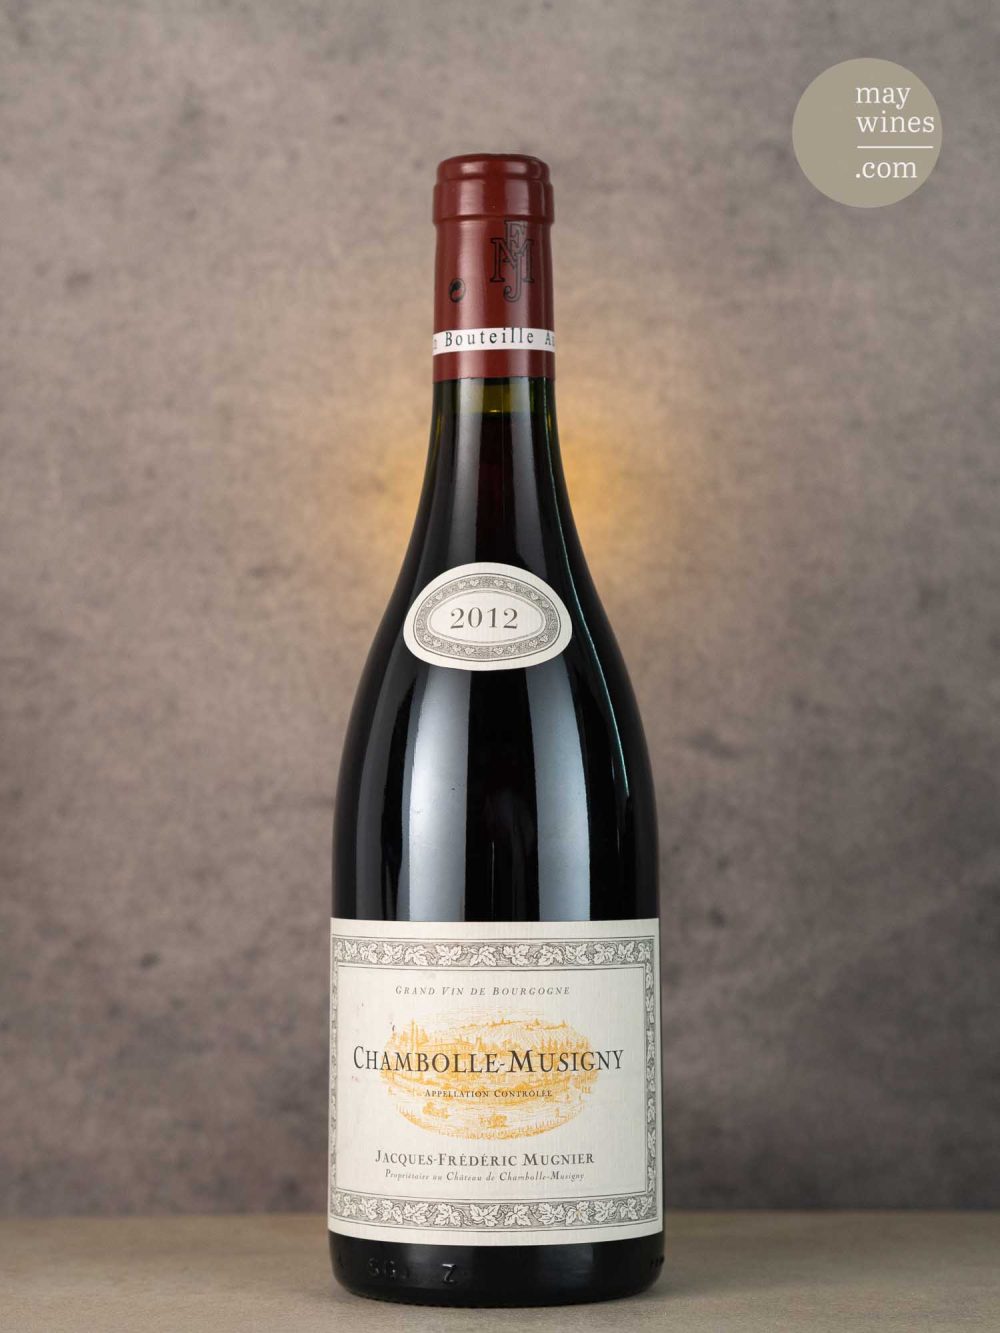 May Wines – Rotwein – 2012 Chambolle-Musigny AC - Jacques-Frédéric Mugnier